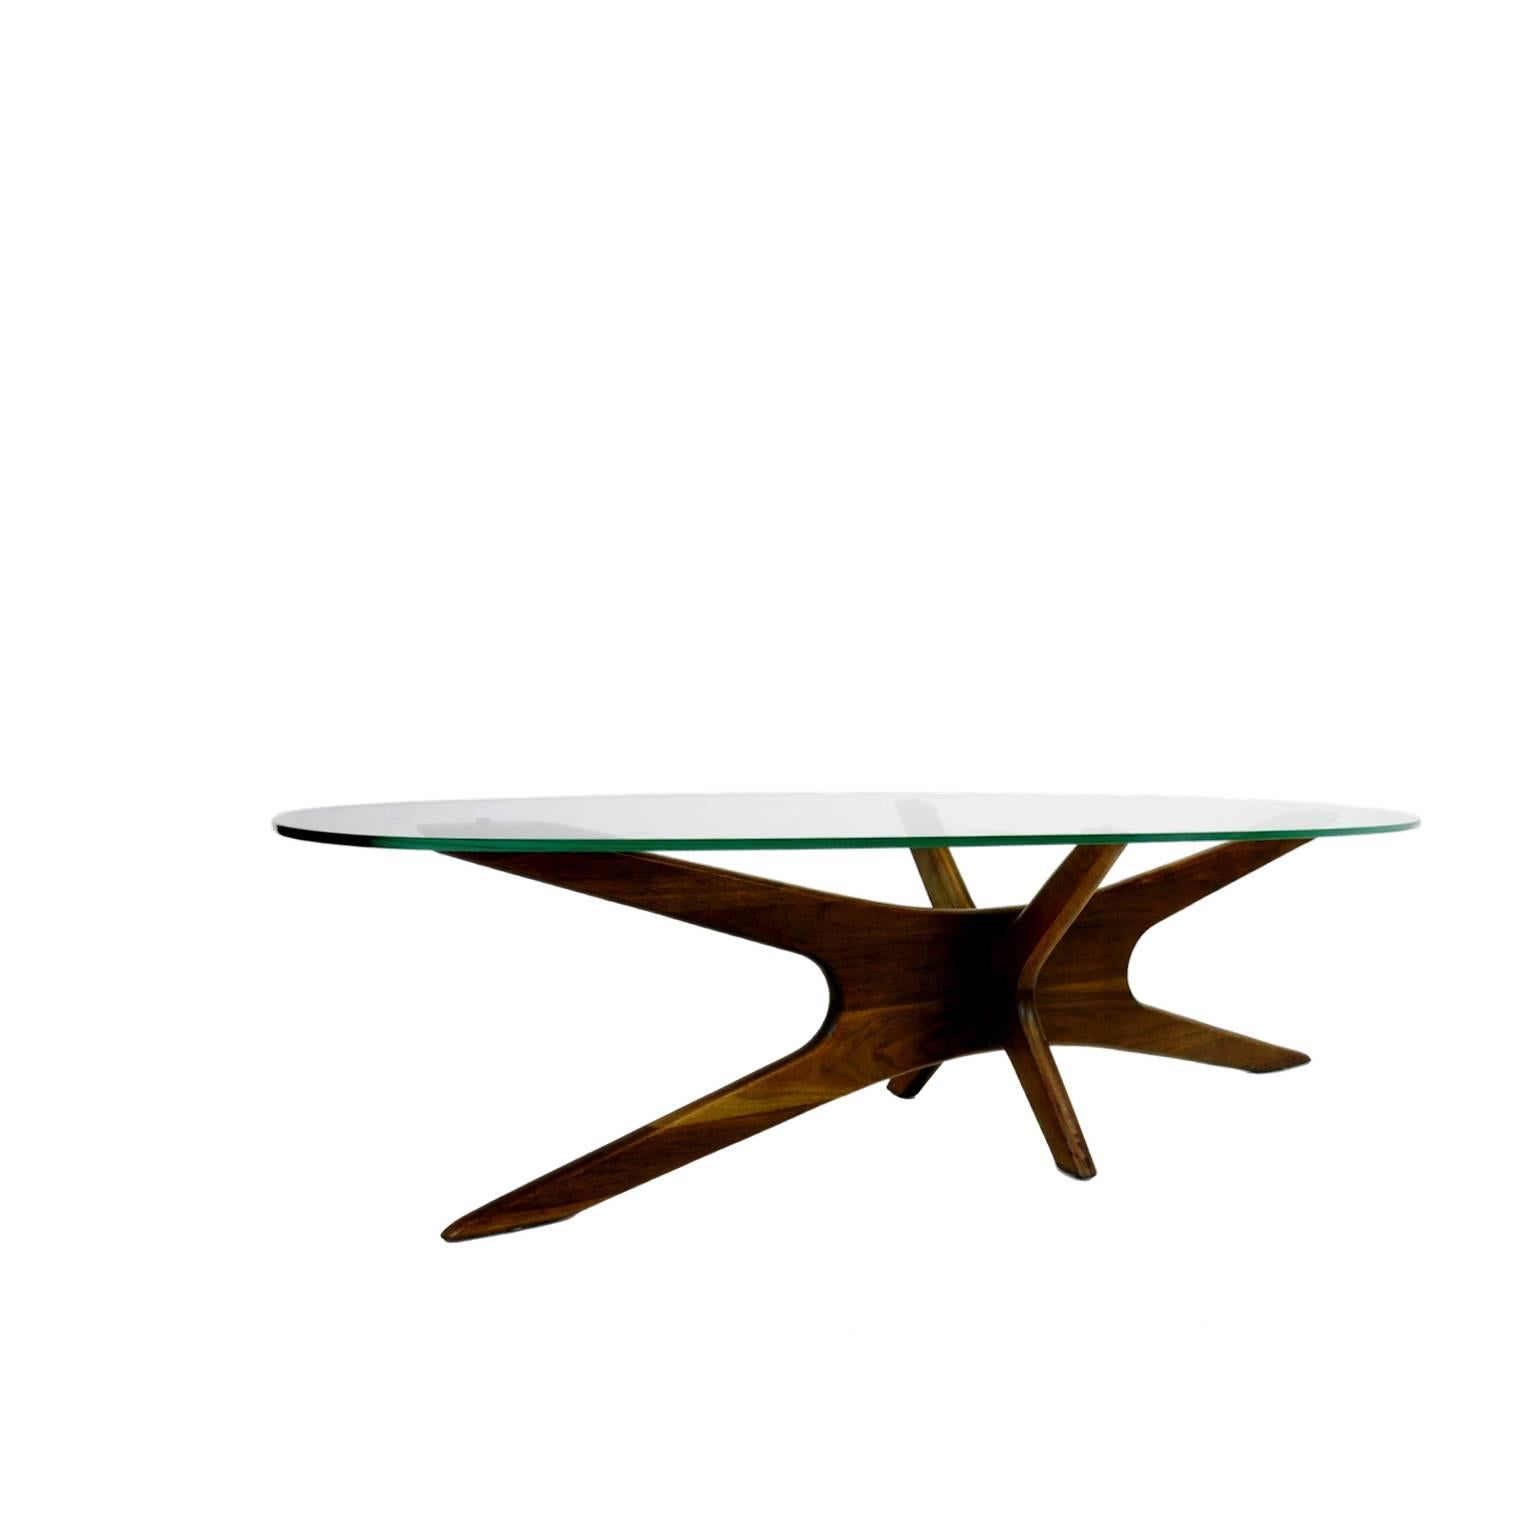 Model # 893 TGO table for Craft Associates. Walnut base with glass top.